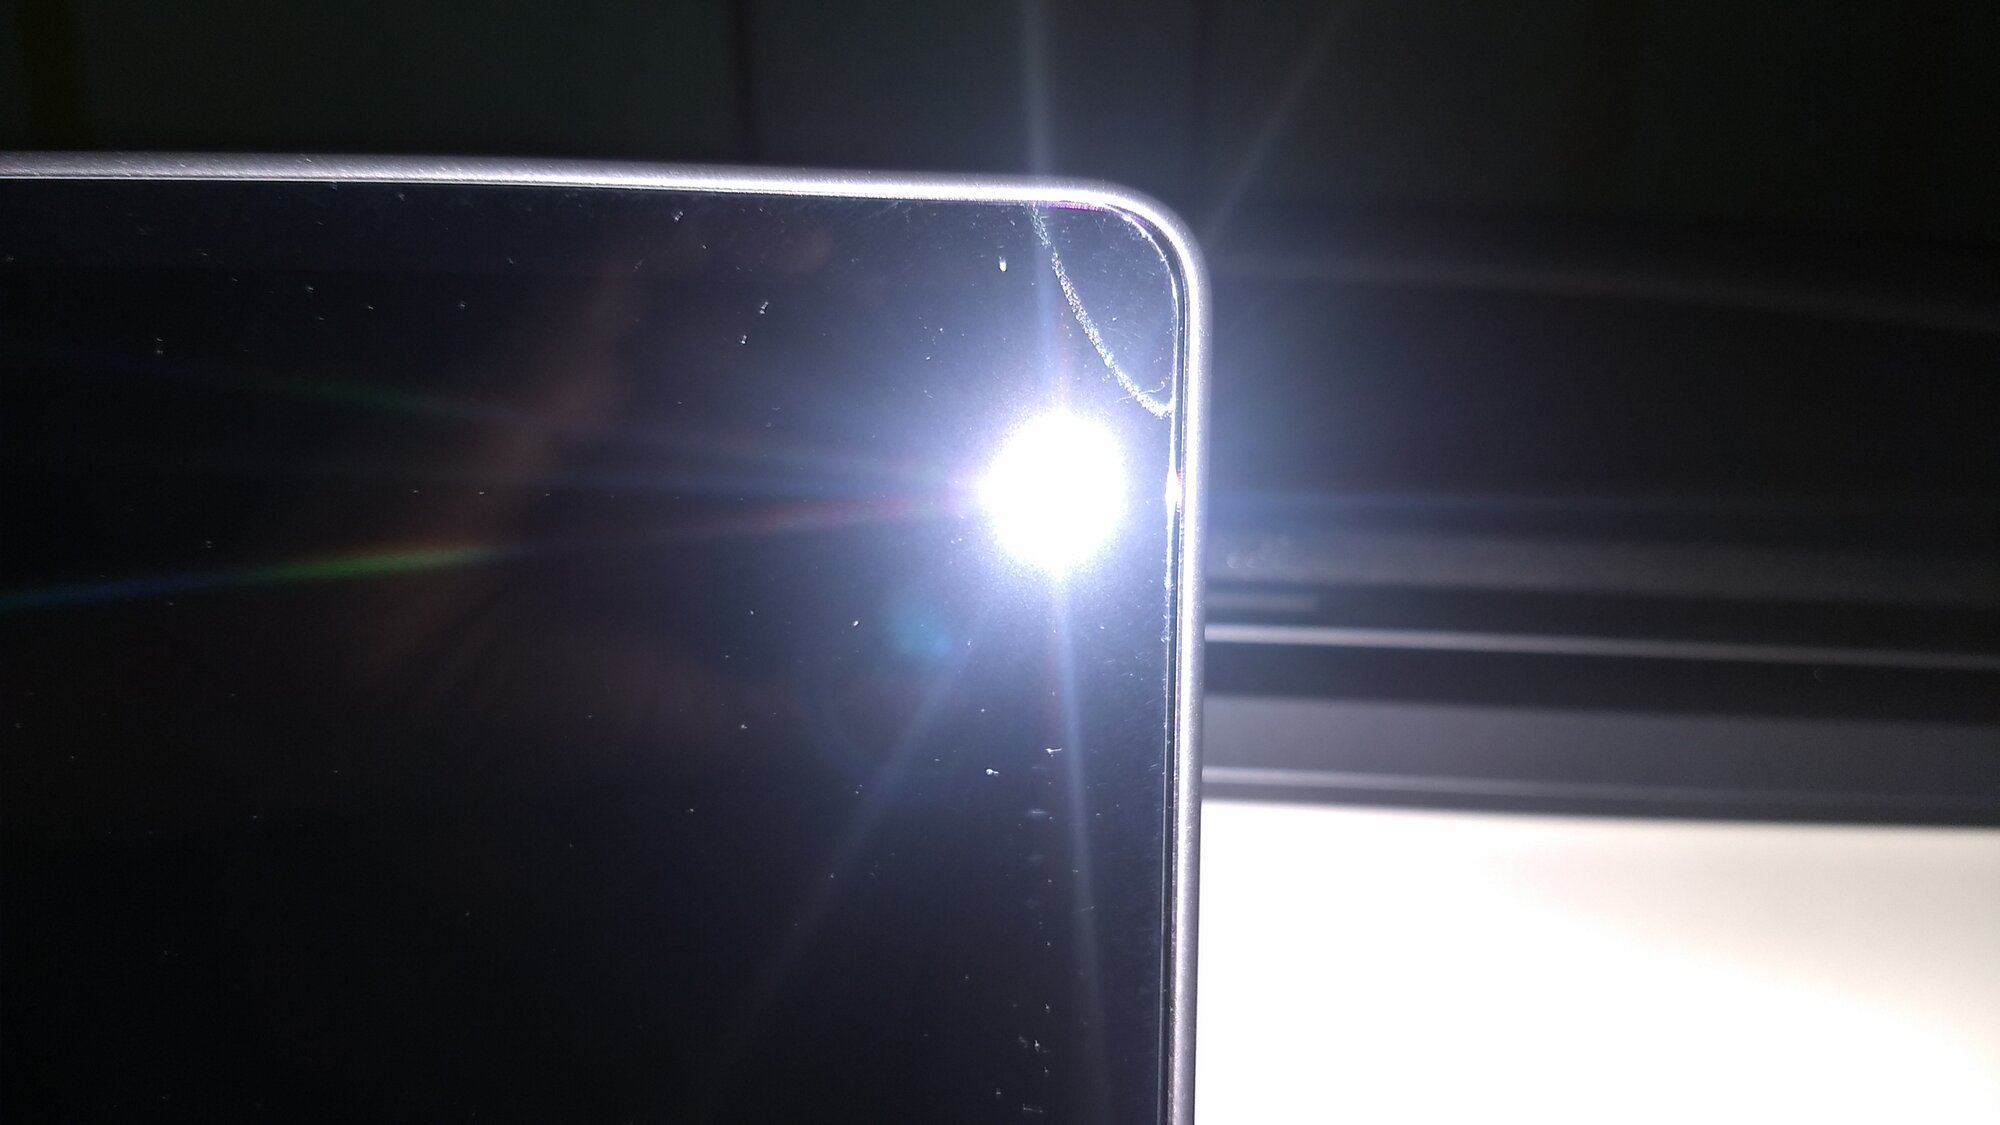 Is anyone using a screen protector on the display?